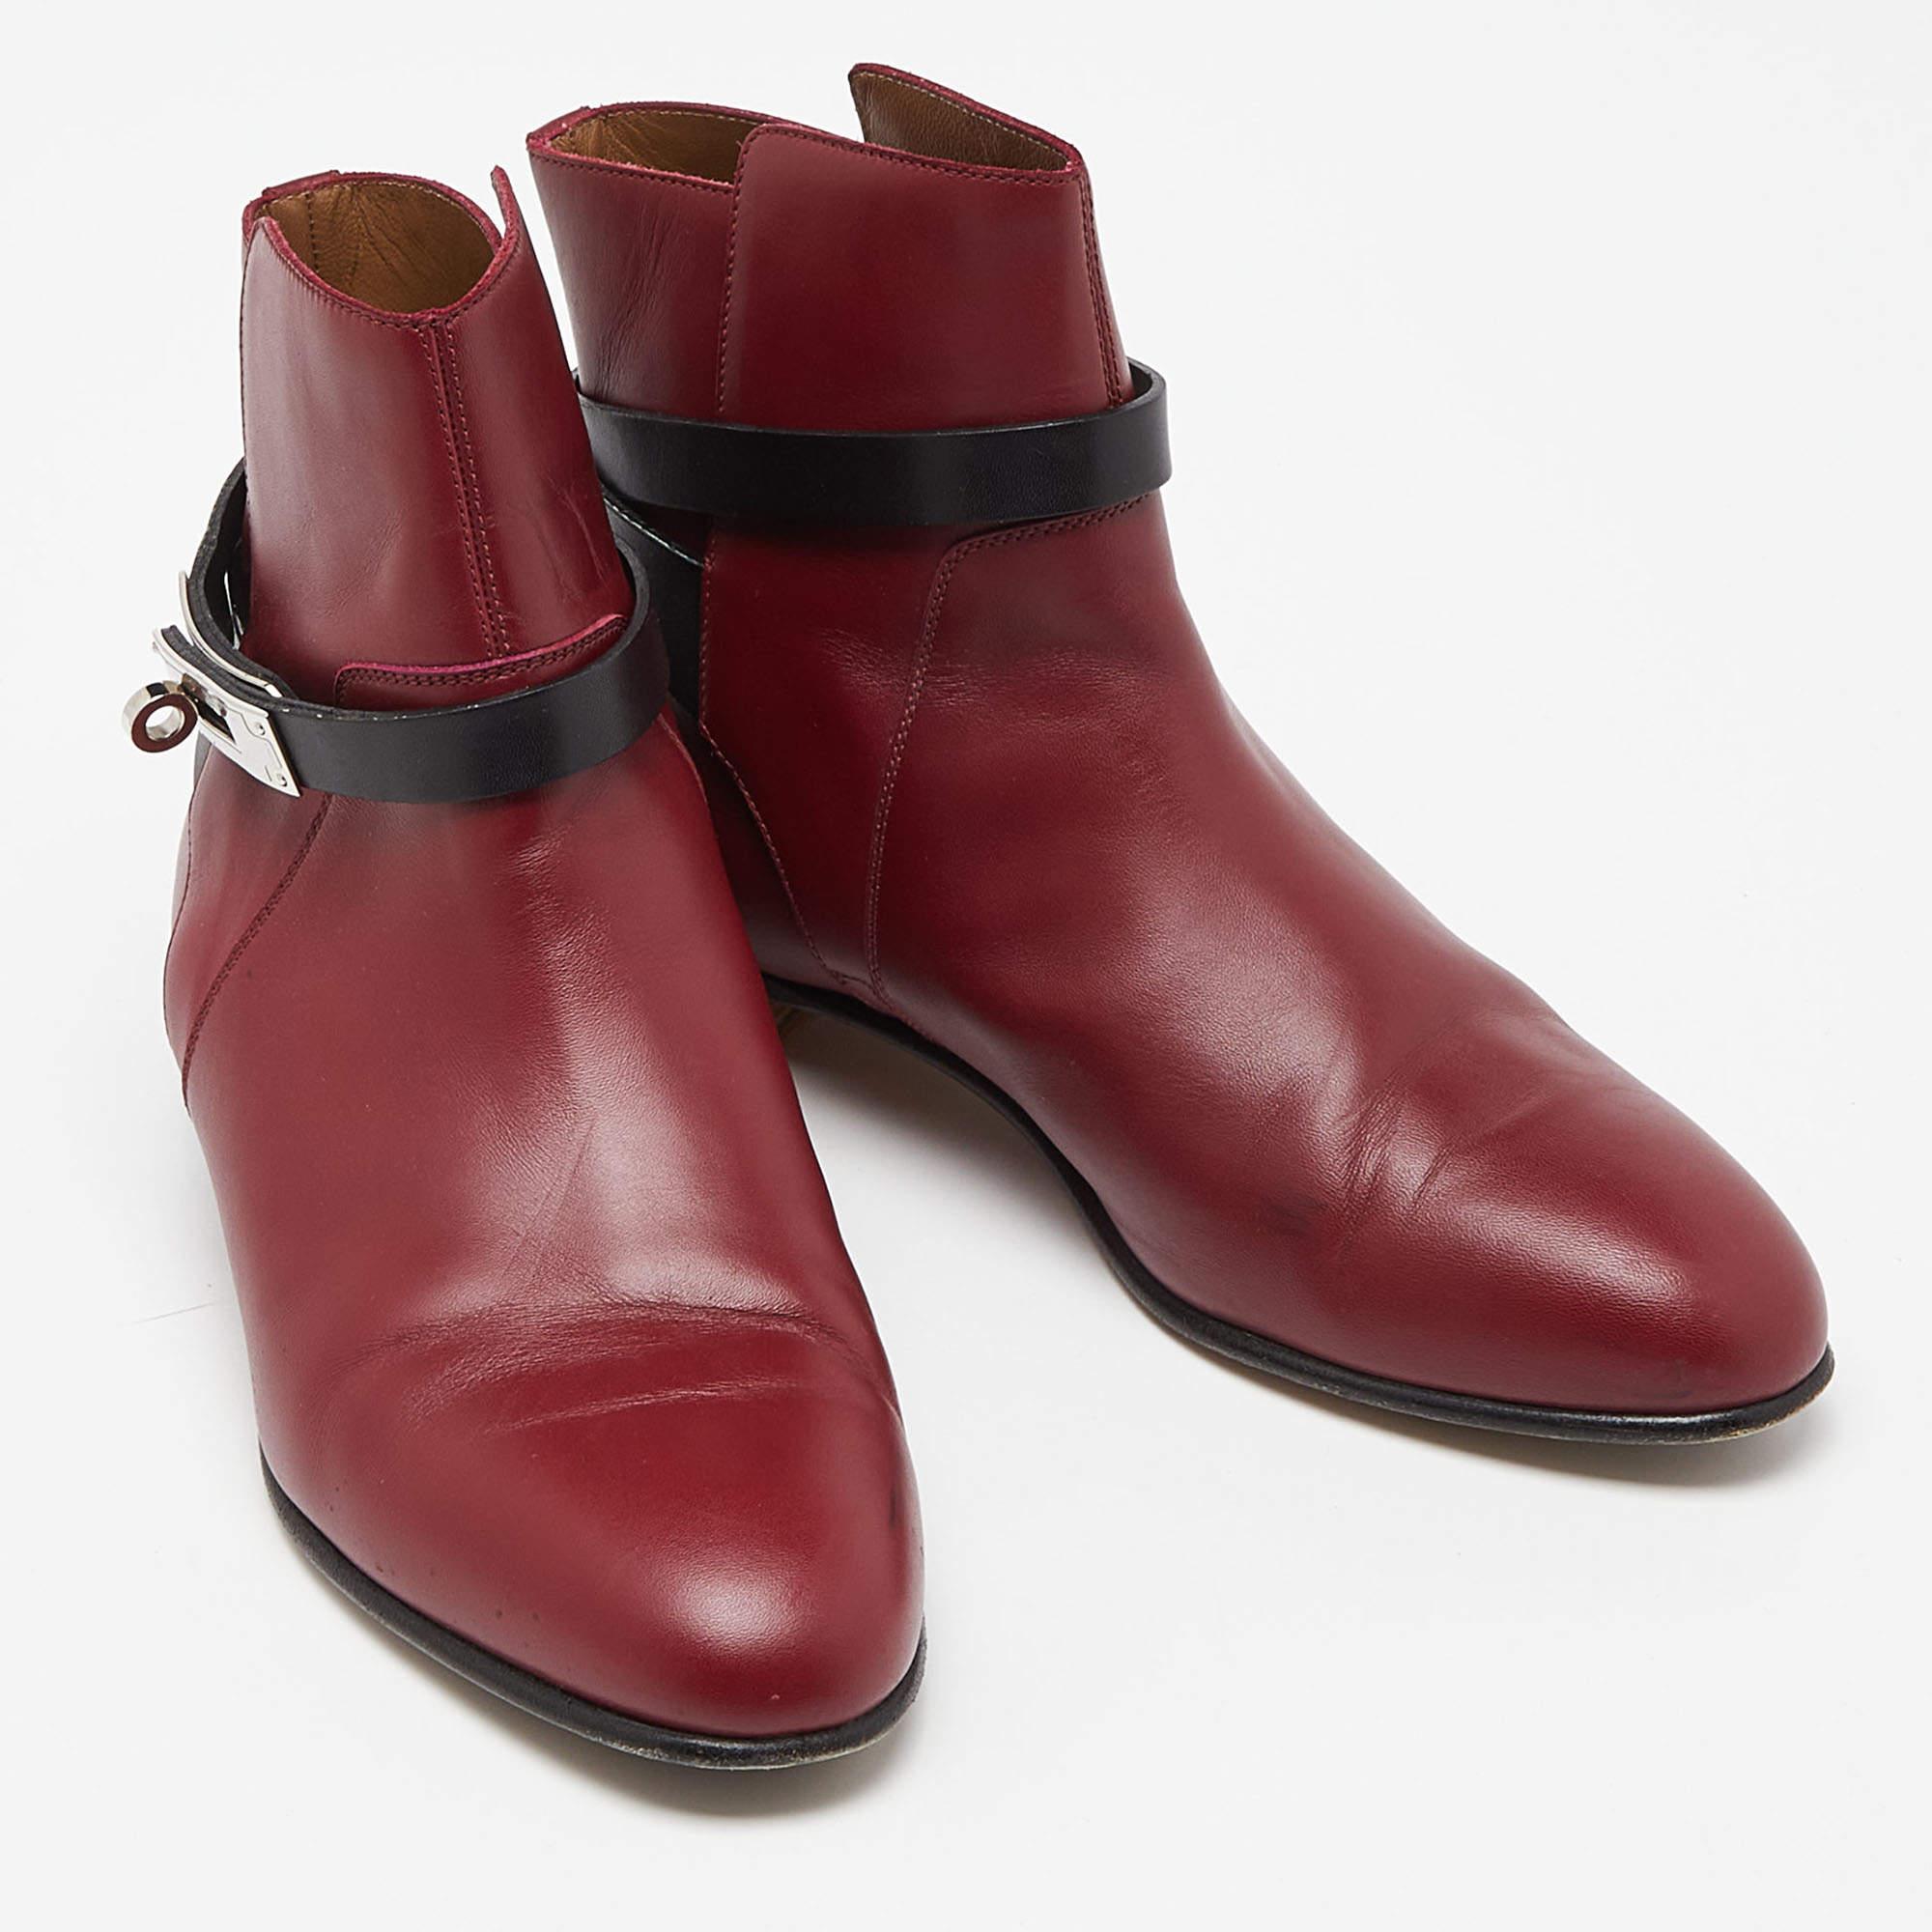 Women's Hermes Burgundy/Black Leather Neo Ankle Boots Size 39